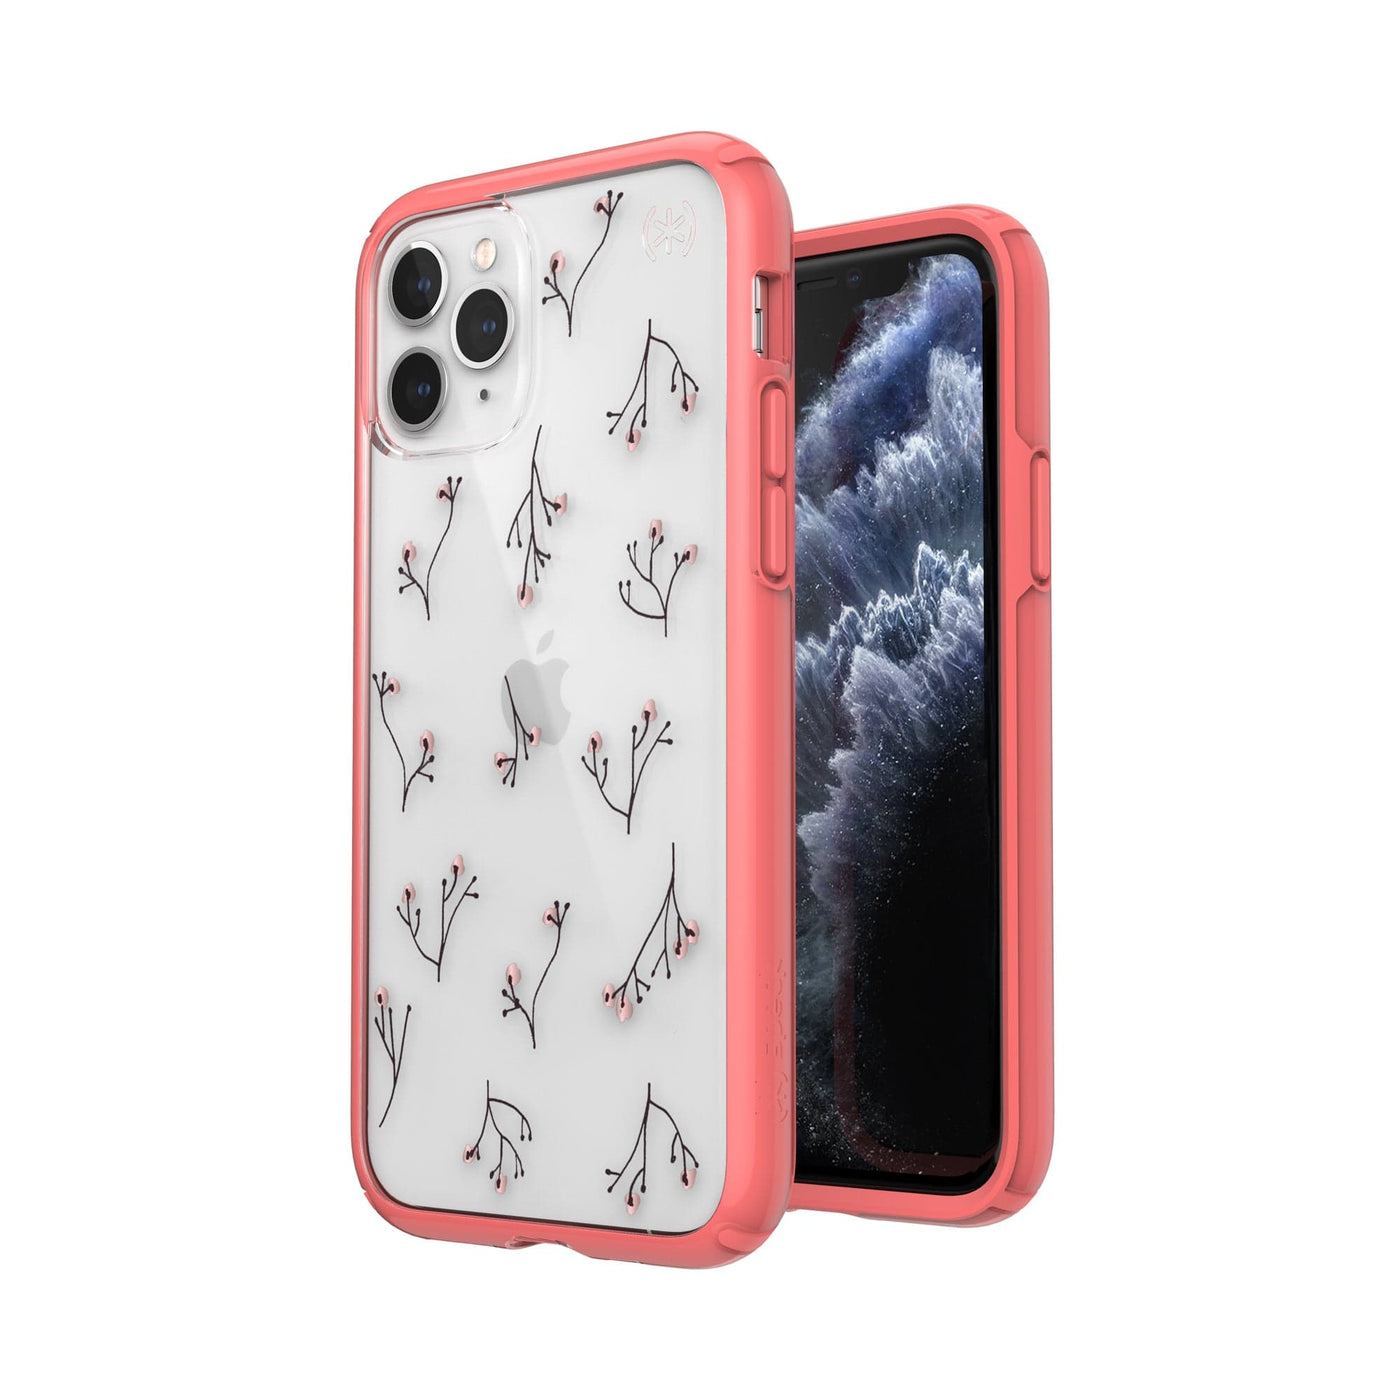 Speck Presidio Perfect-Clear + Print iPhone 11 Pro Cases Best iPhone 11 Pro  - $44.99